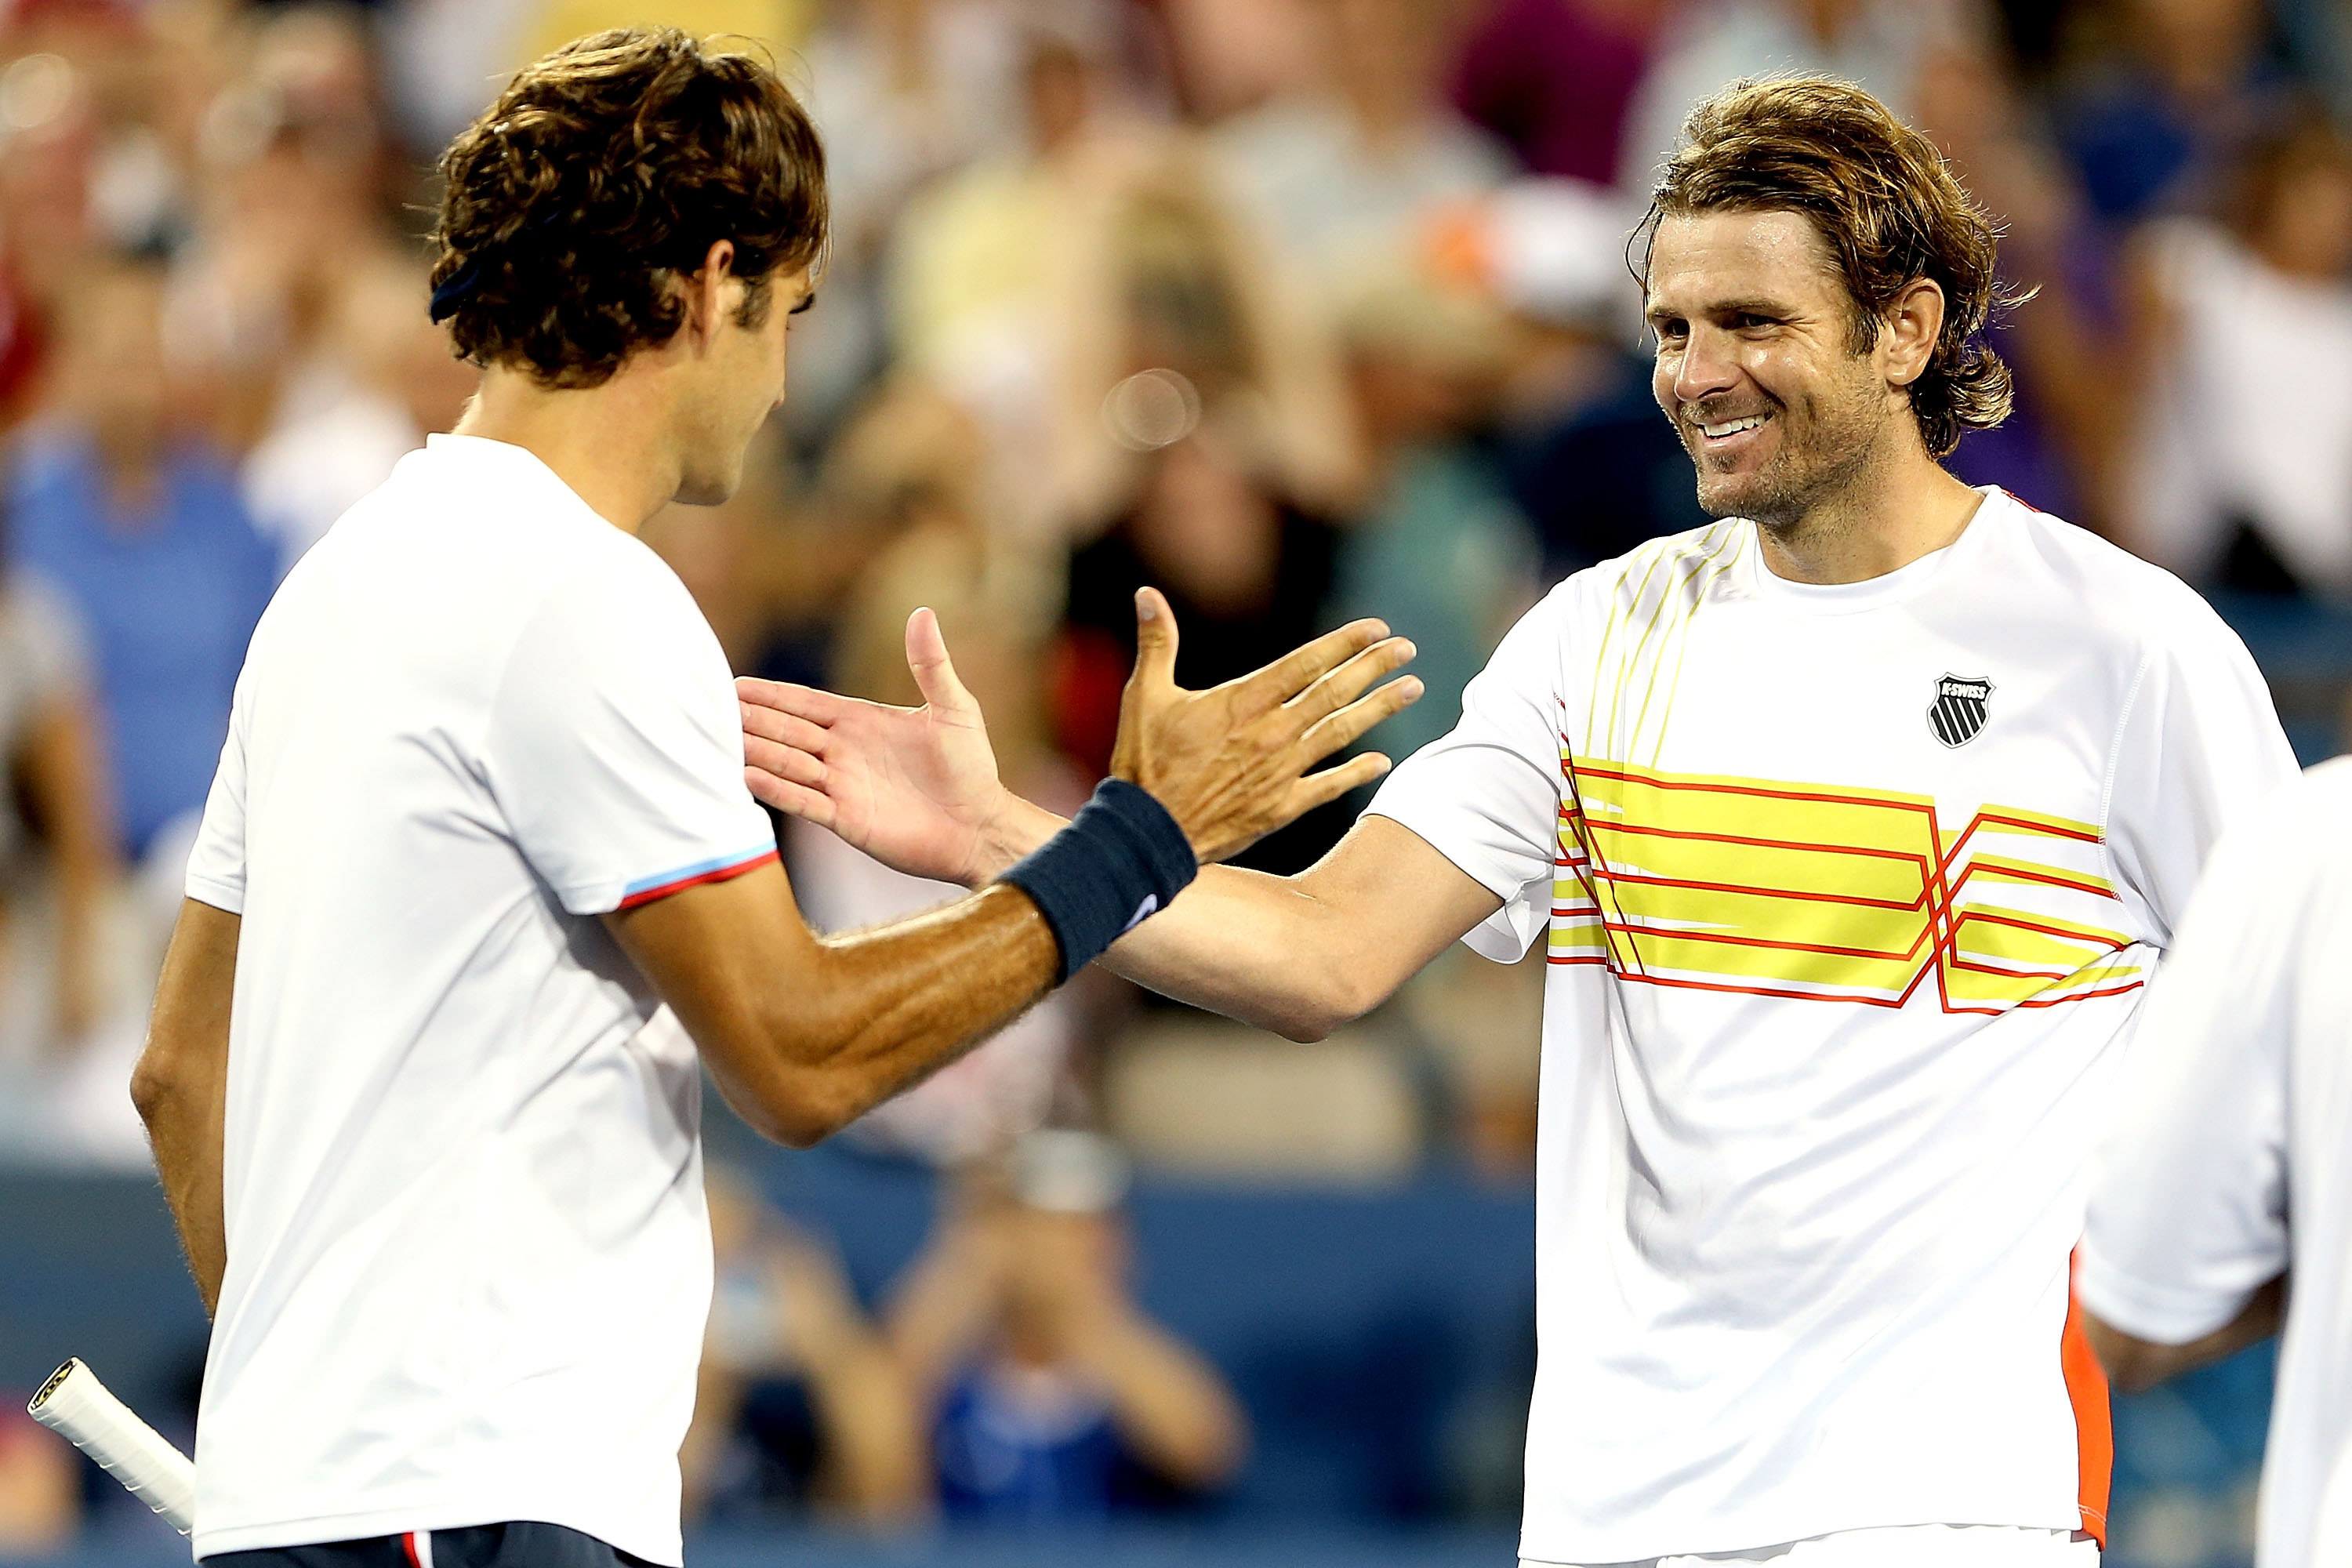 2012 US Open: Roger Federer Gets a Walkover as Mardy Fish Withdraws | News, Scores, Highlights, Stats, and Rumors | Bleacher Report